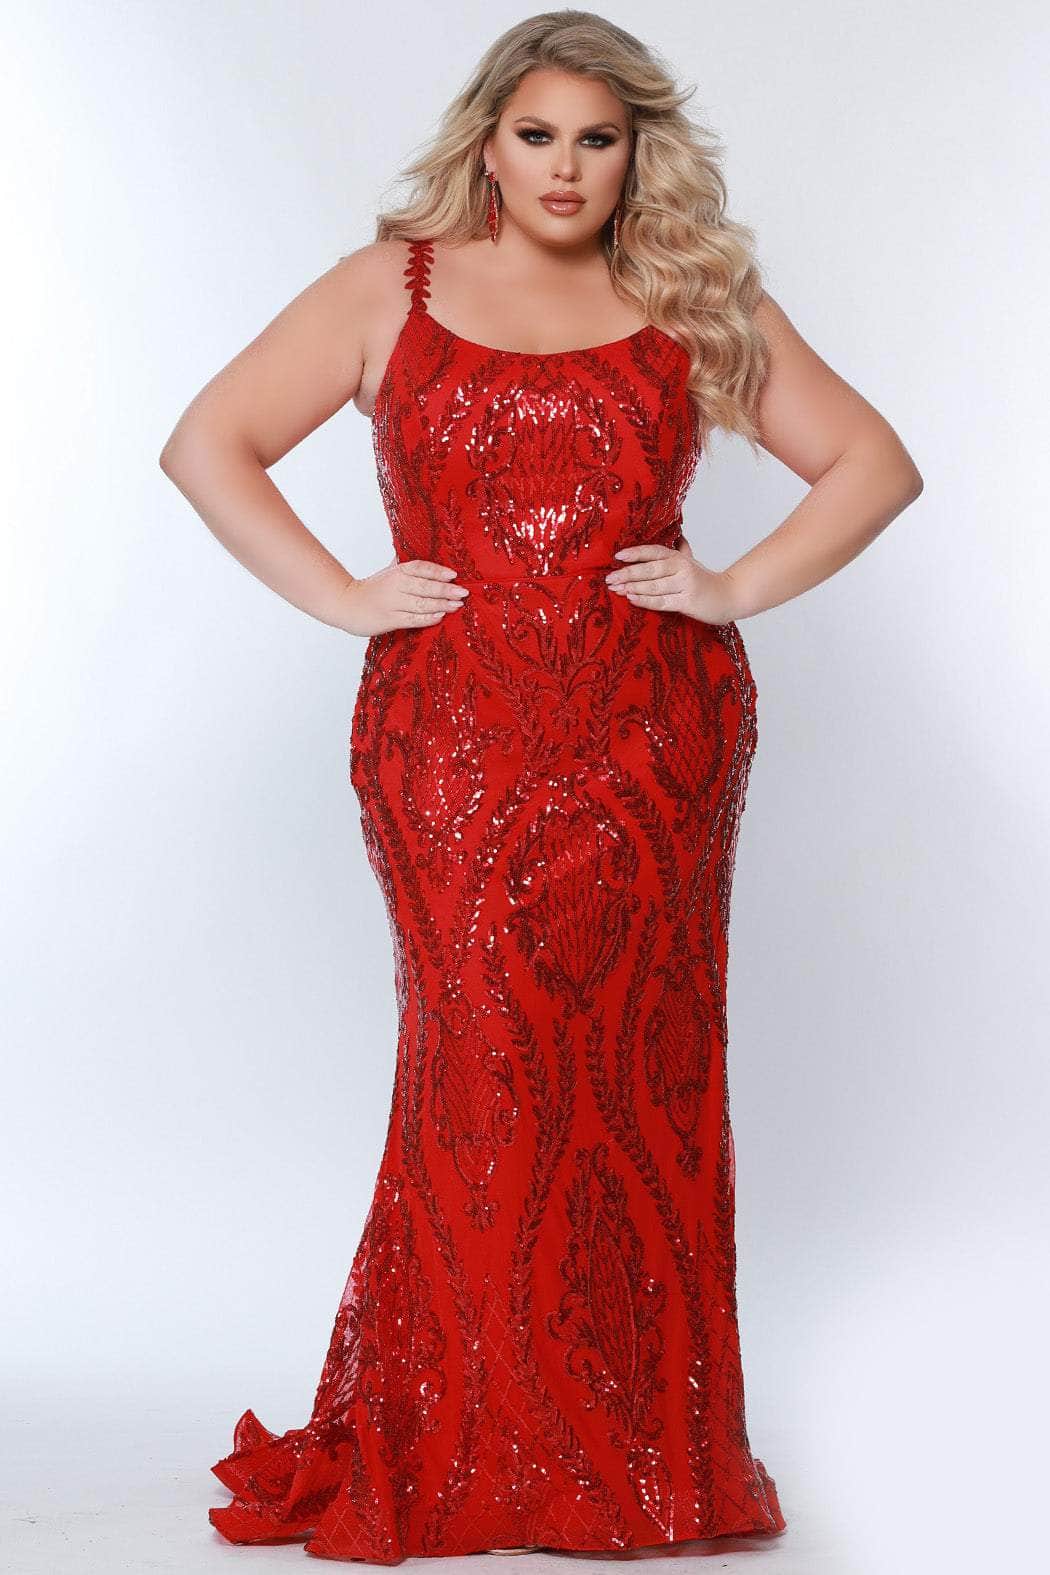 Sydney's Closet SC7332 - Sequined Scoop Formal Gown Special Occasion Dress